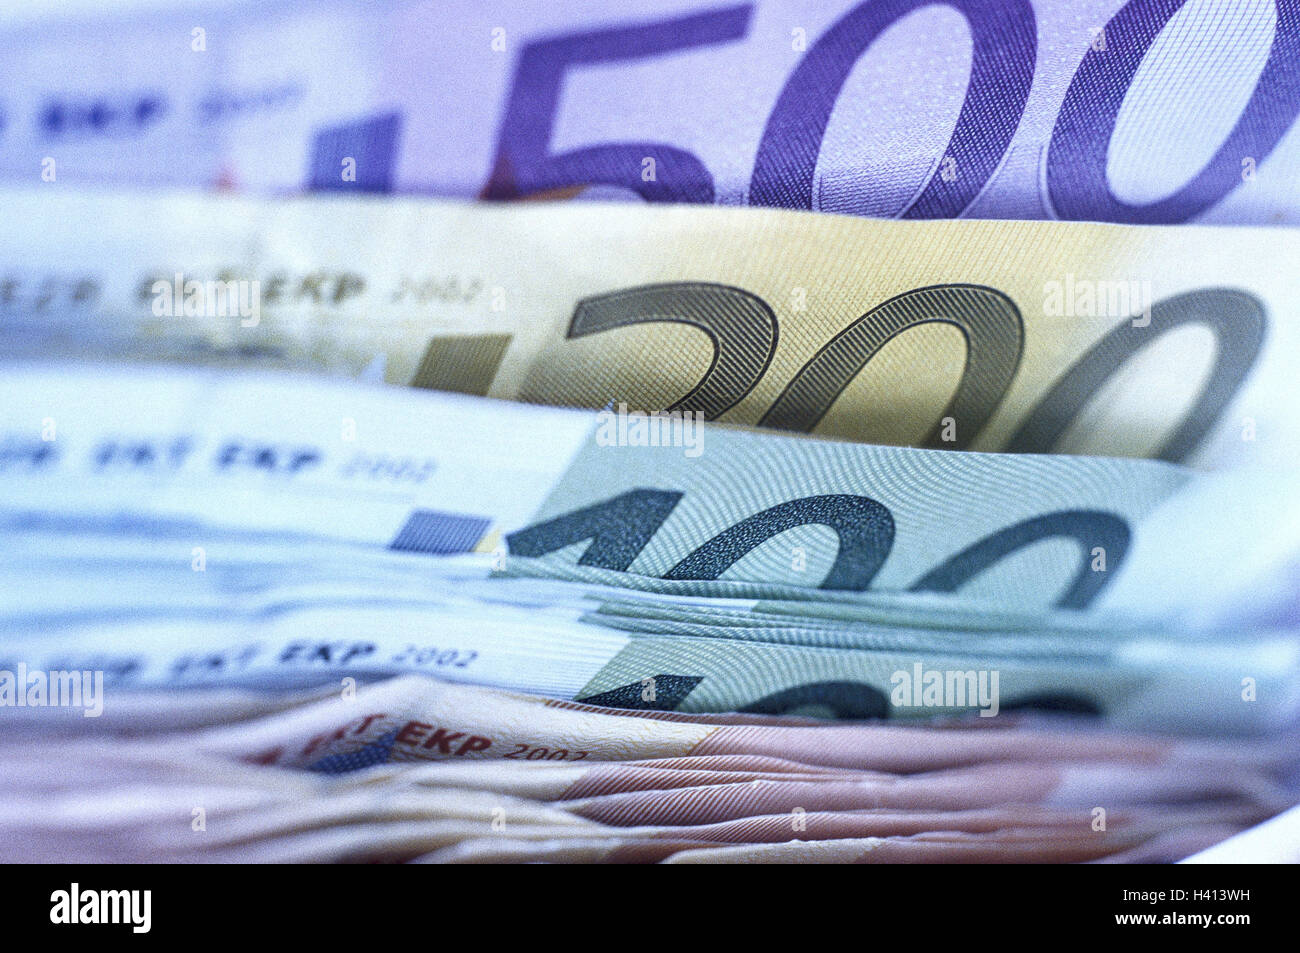 Euro banknotes, differently, detail, bank notes, banknotes, money, euronotes, currency, euro, single currency, currency unit, Europe, the EU, means payment, European, content, reward, expensive, save, Teuro, display, savings, having, value, passed away, b Stock Photo